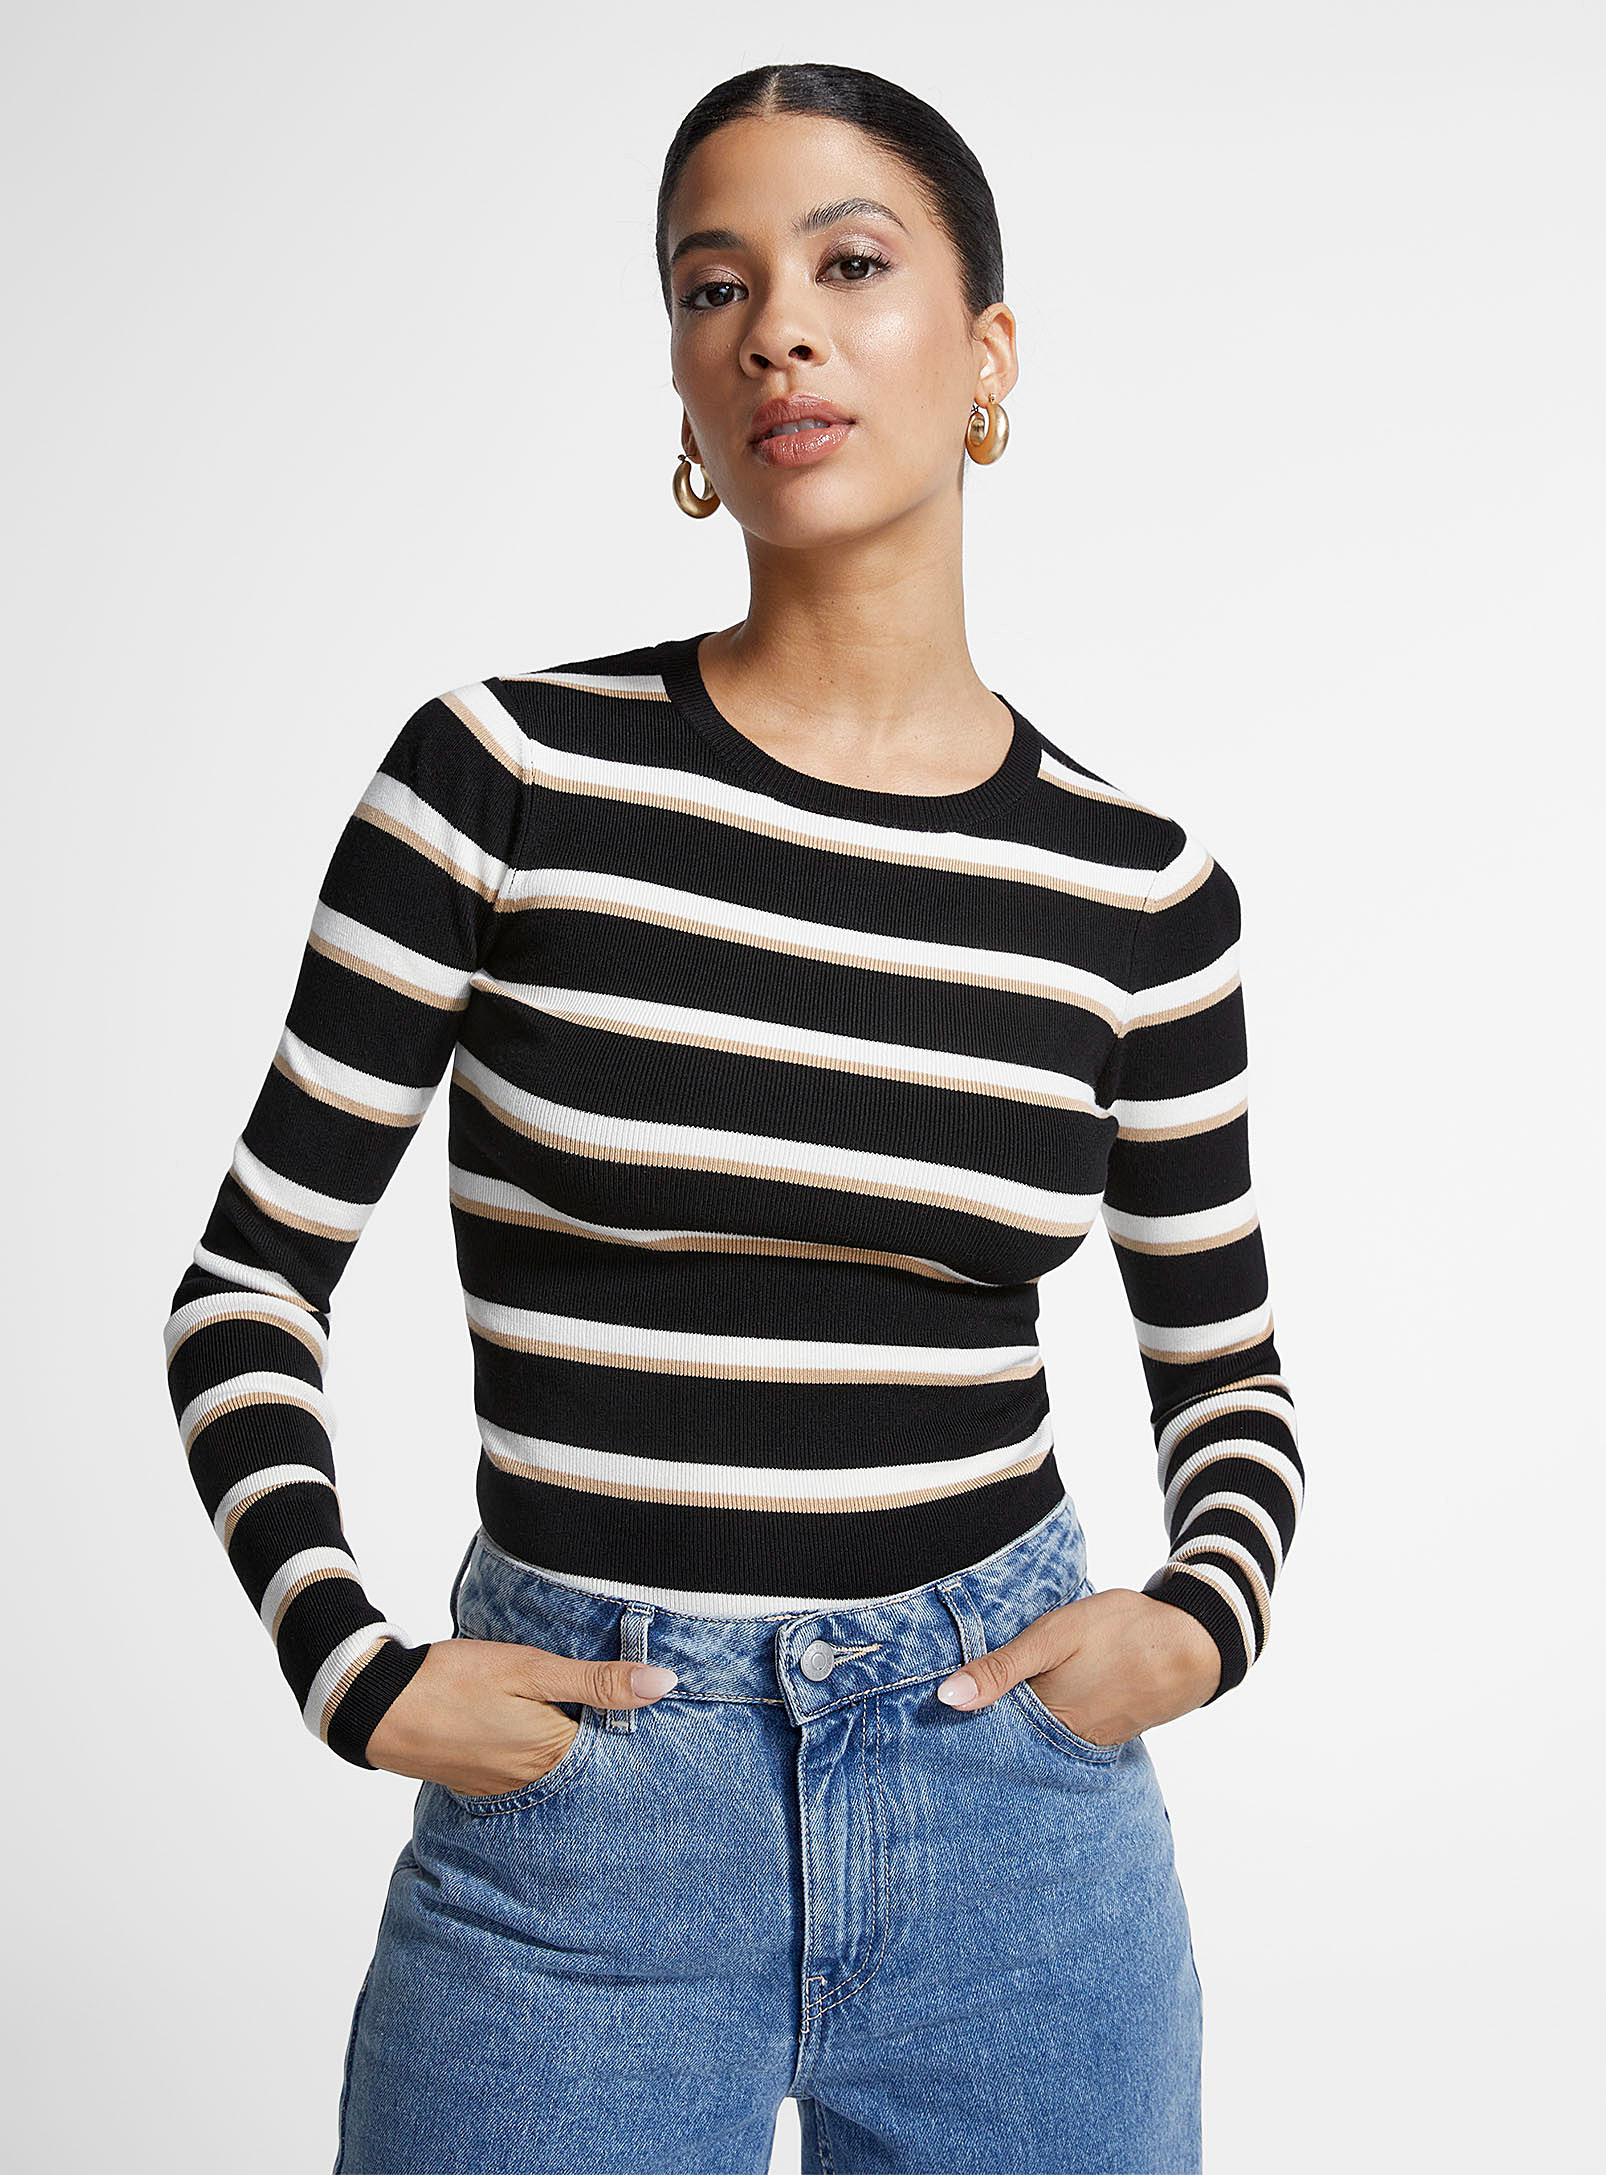 Icone Striped Fitted Sweater In Patterned Black